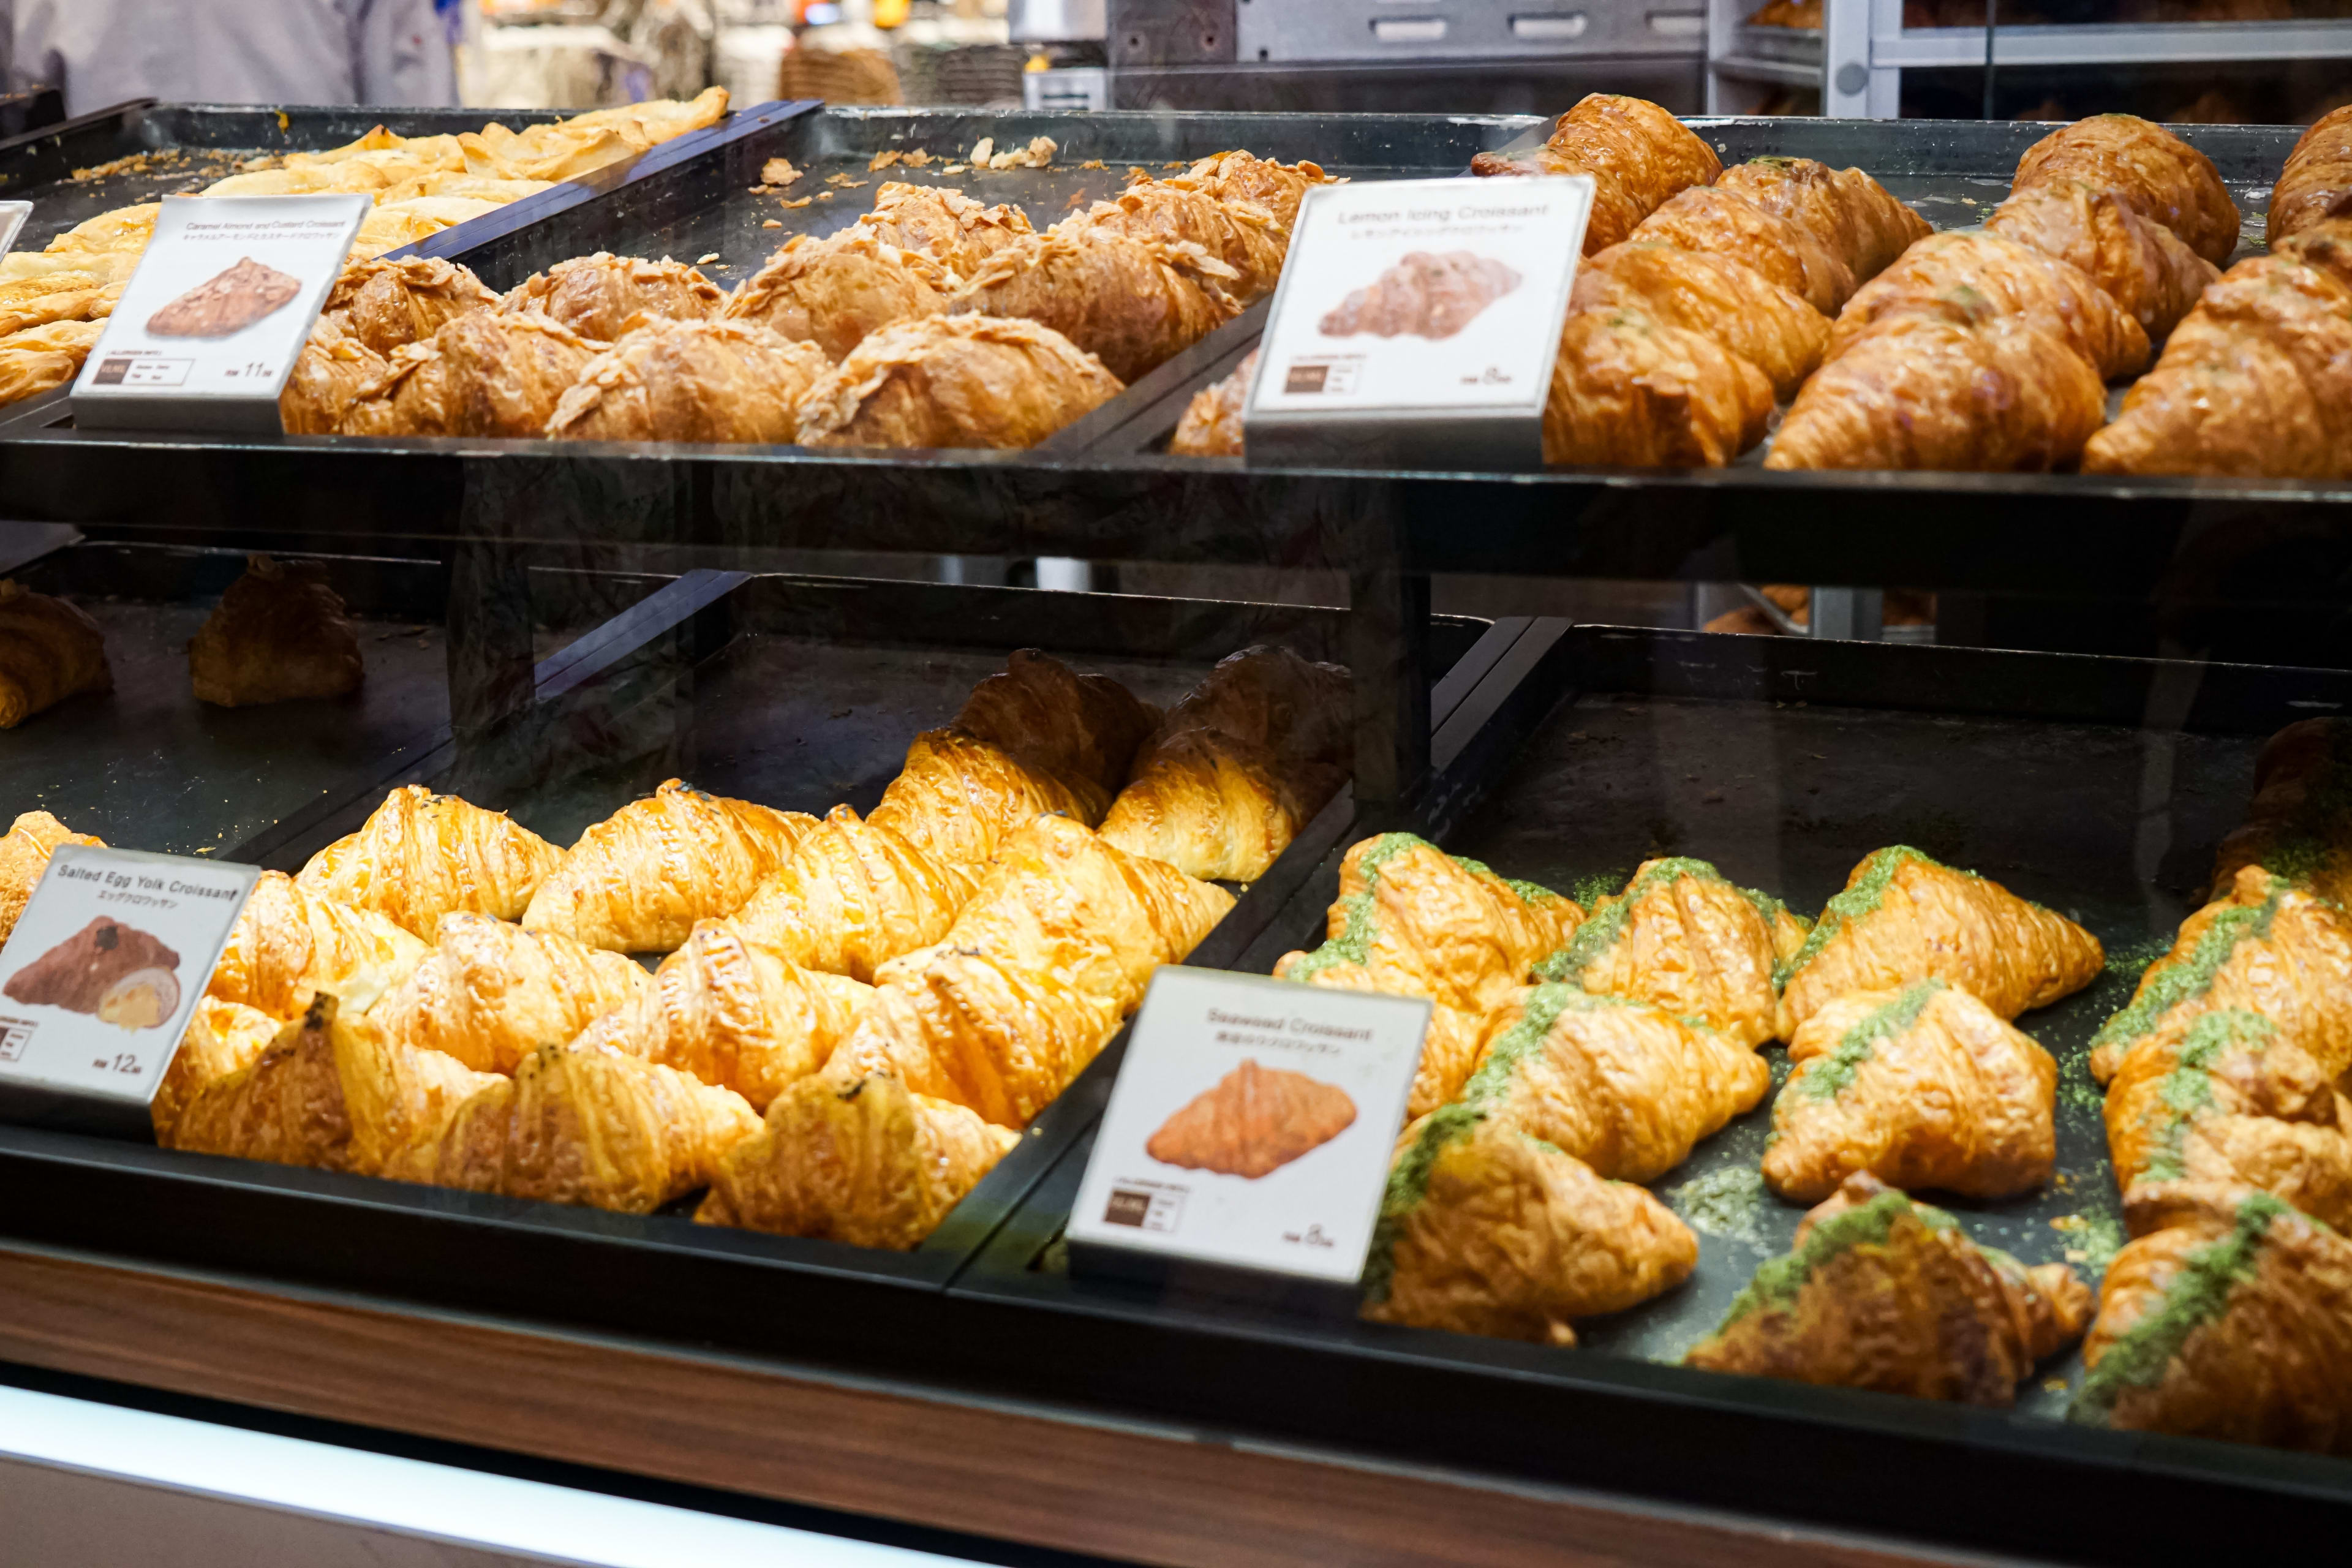 Display of croissants showcasing various flavours